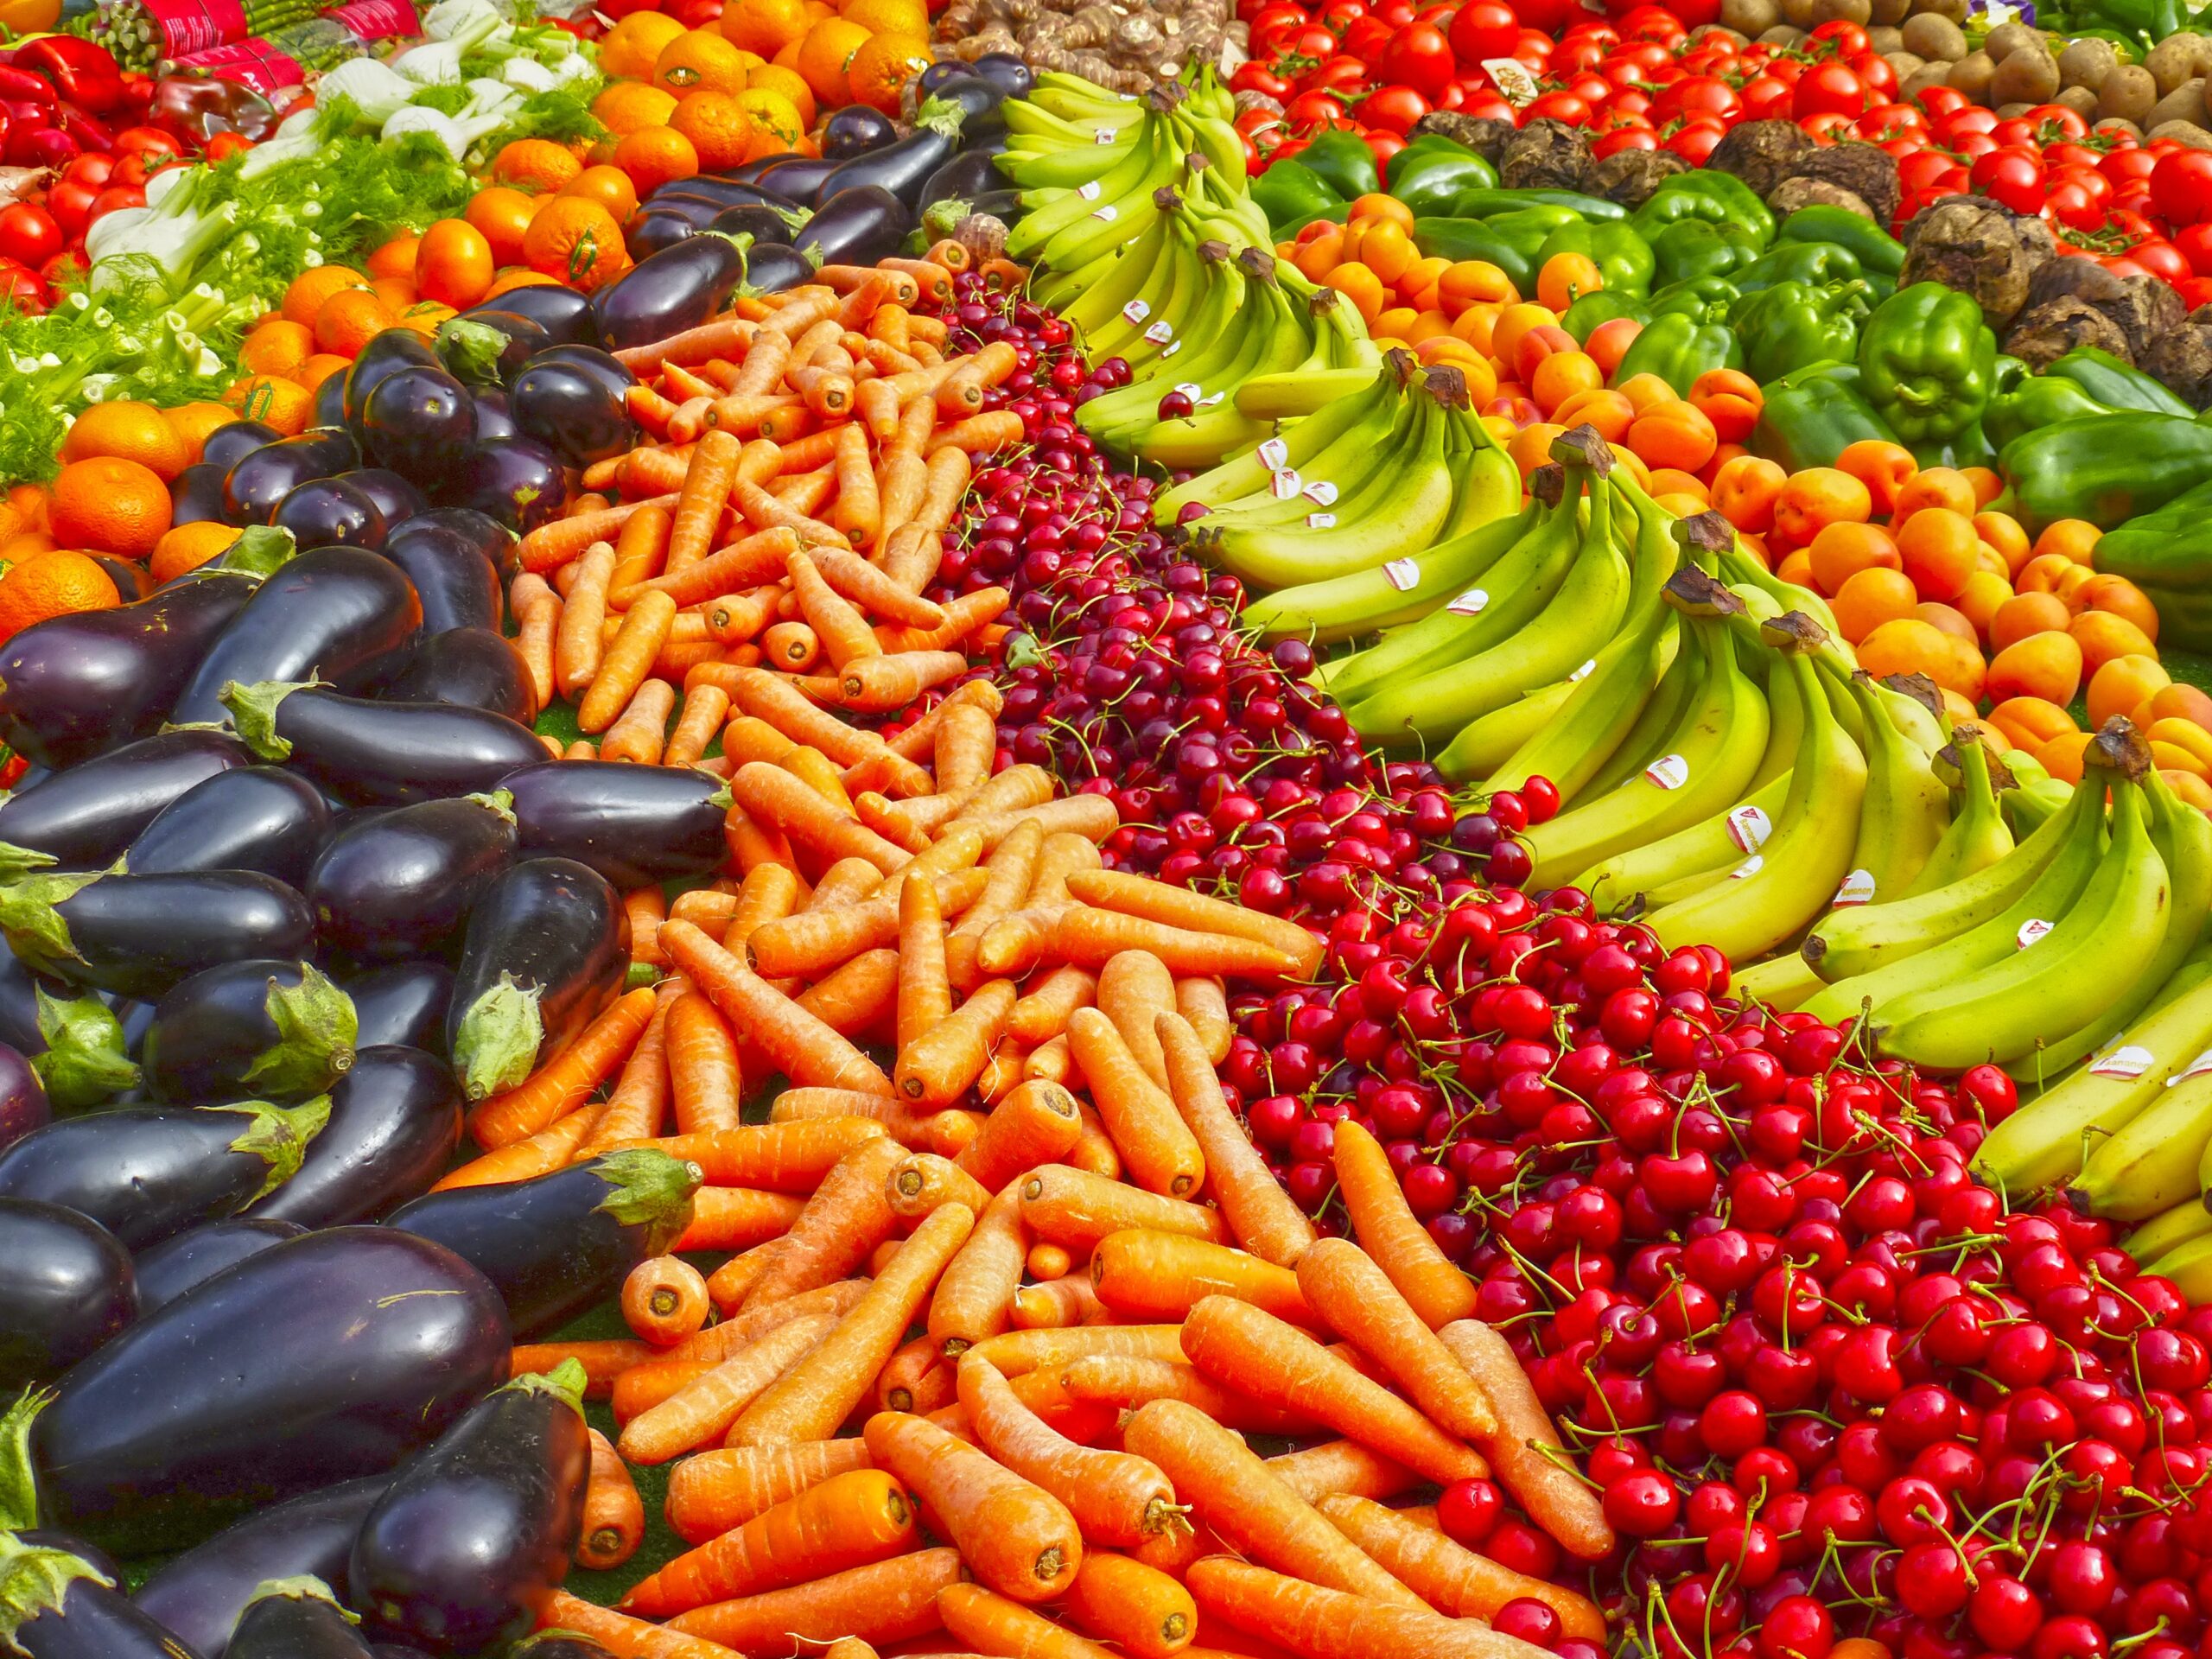 Fruits and vegetables could save your life—but not from any one disease.